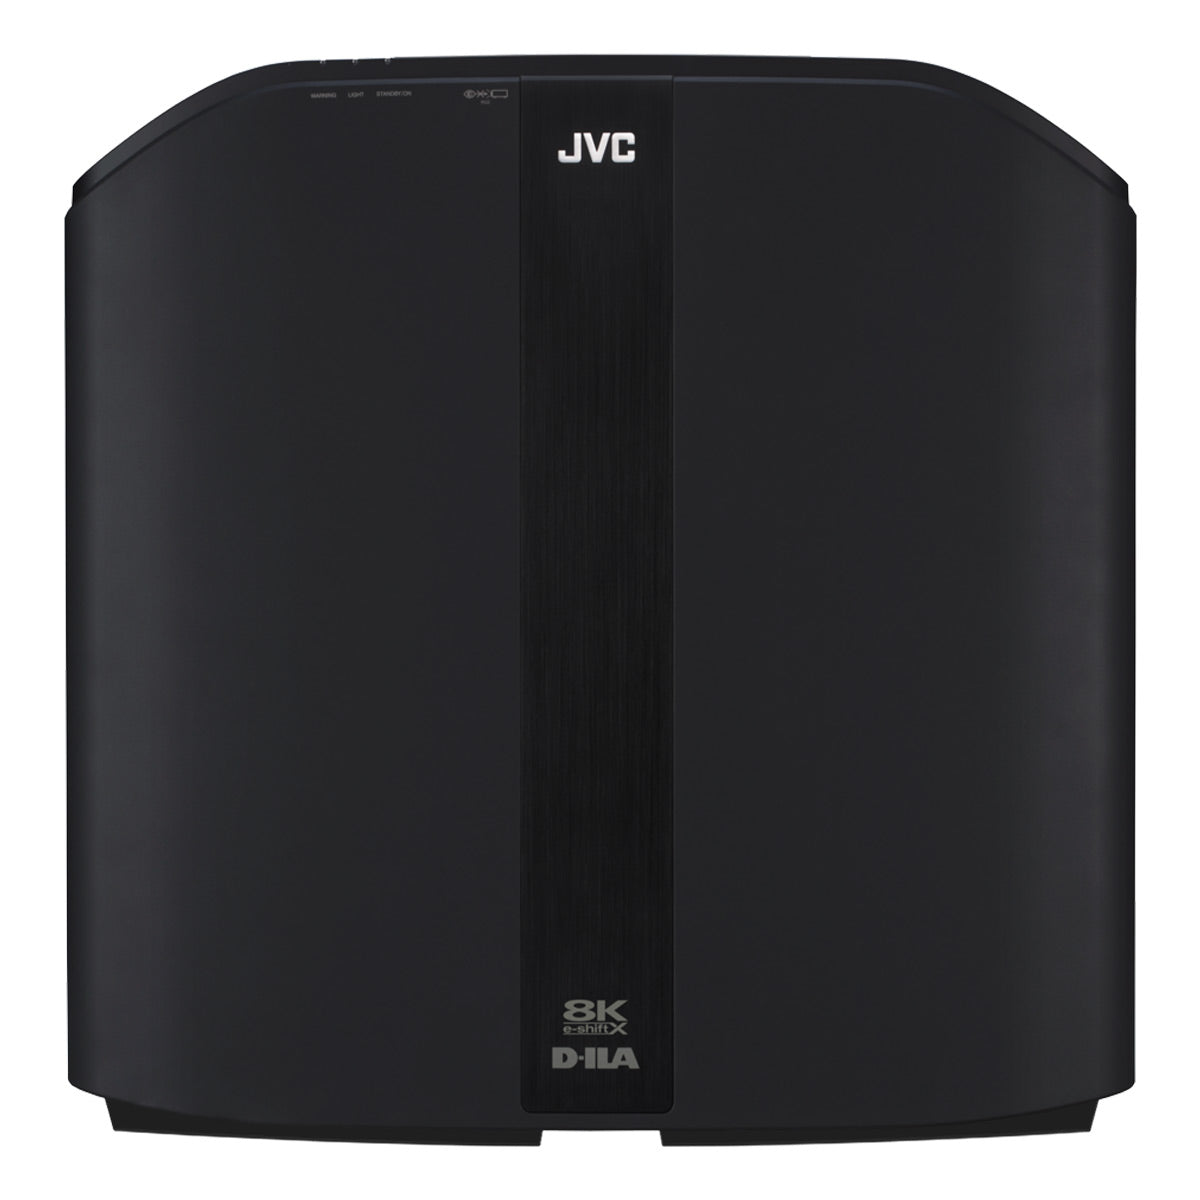 JVC DLA-NZ800 D-ILA Laser 8K Home Theater and Gaming Projector